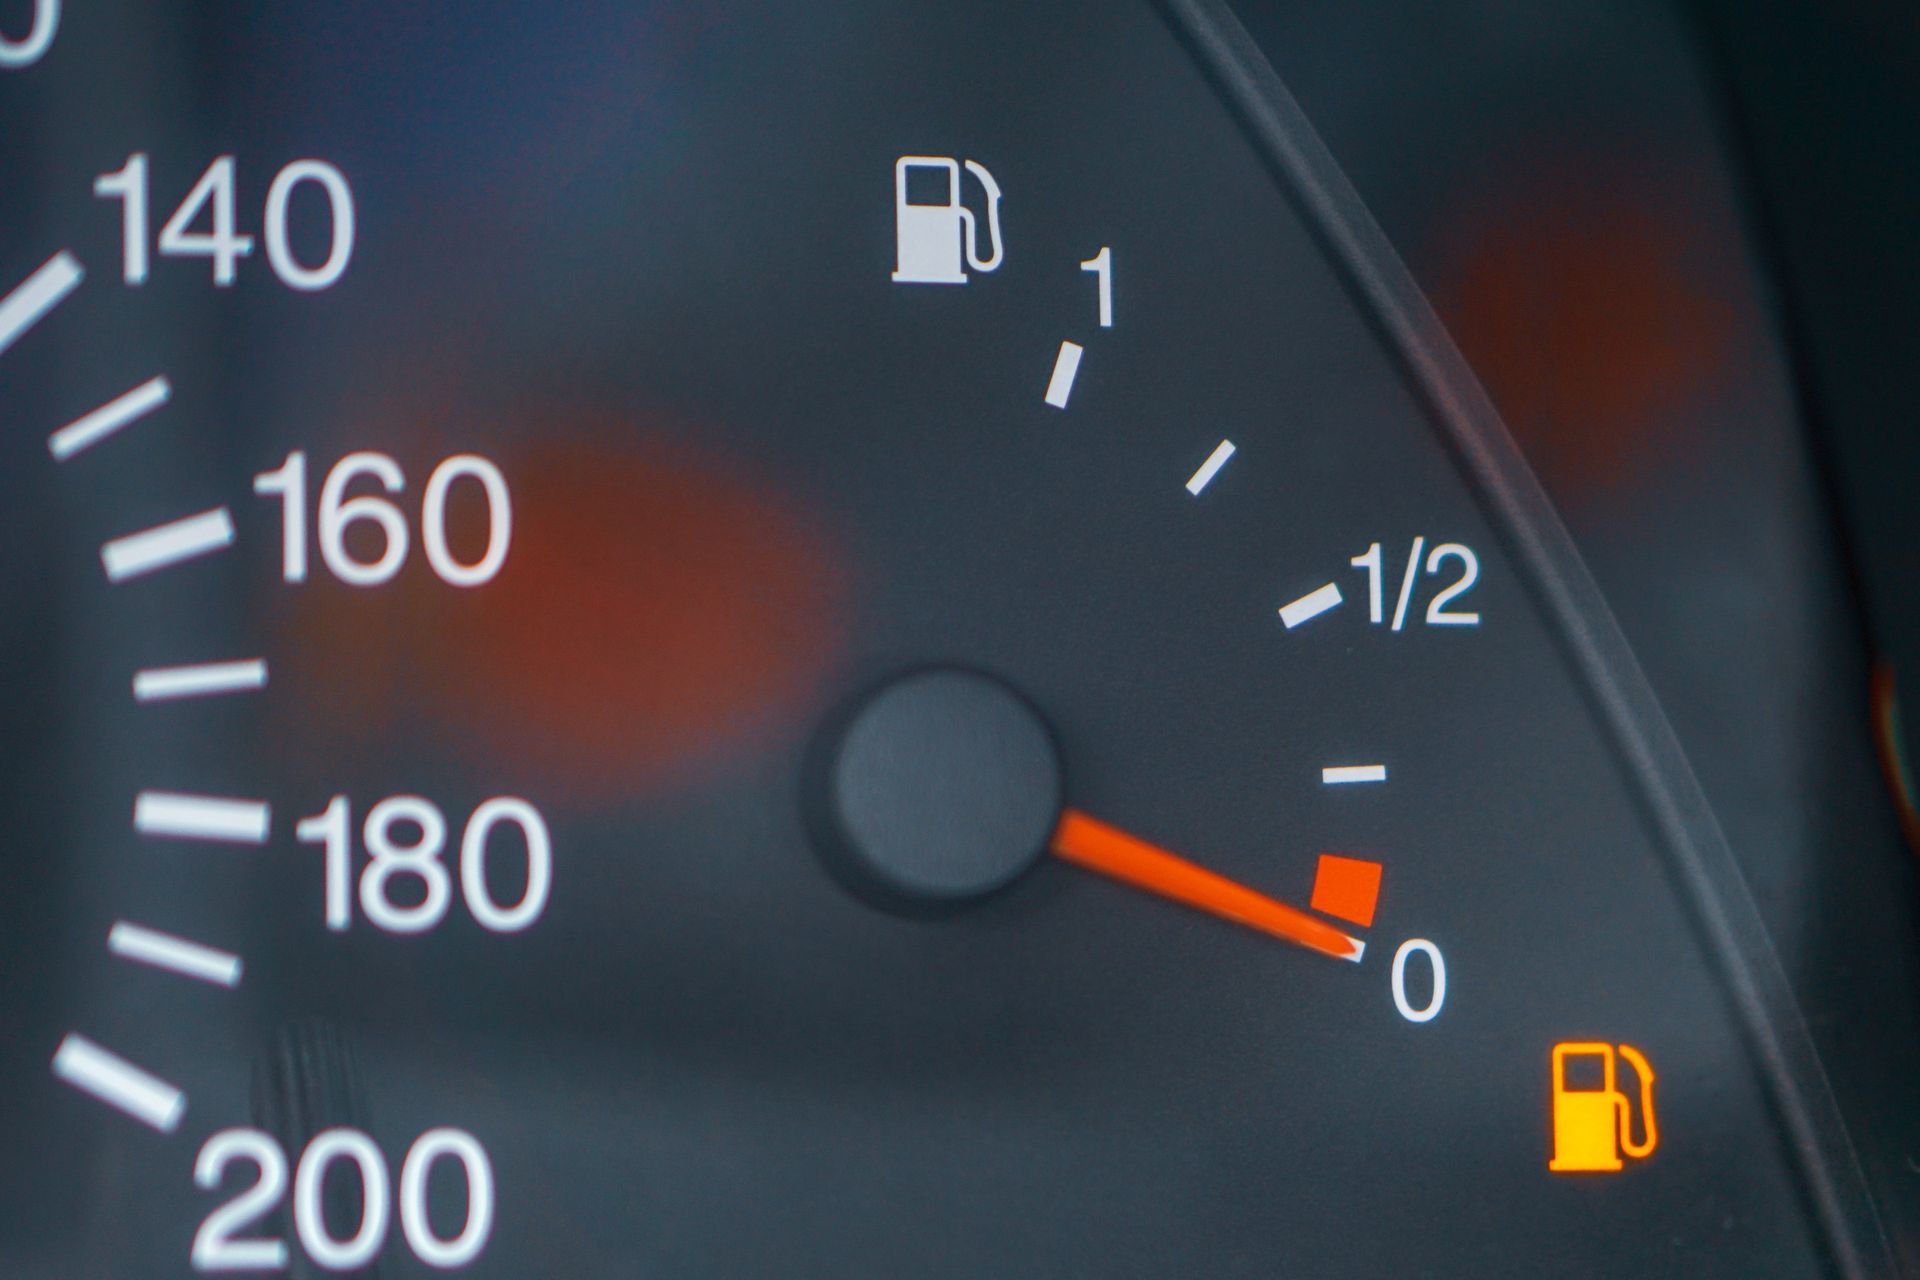 Close-up of a car dashboard with the fuel gauge indicating low fuel and the gas light illuminated.